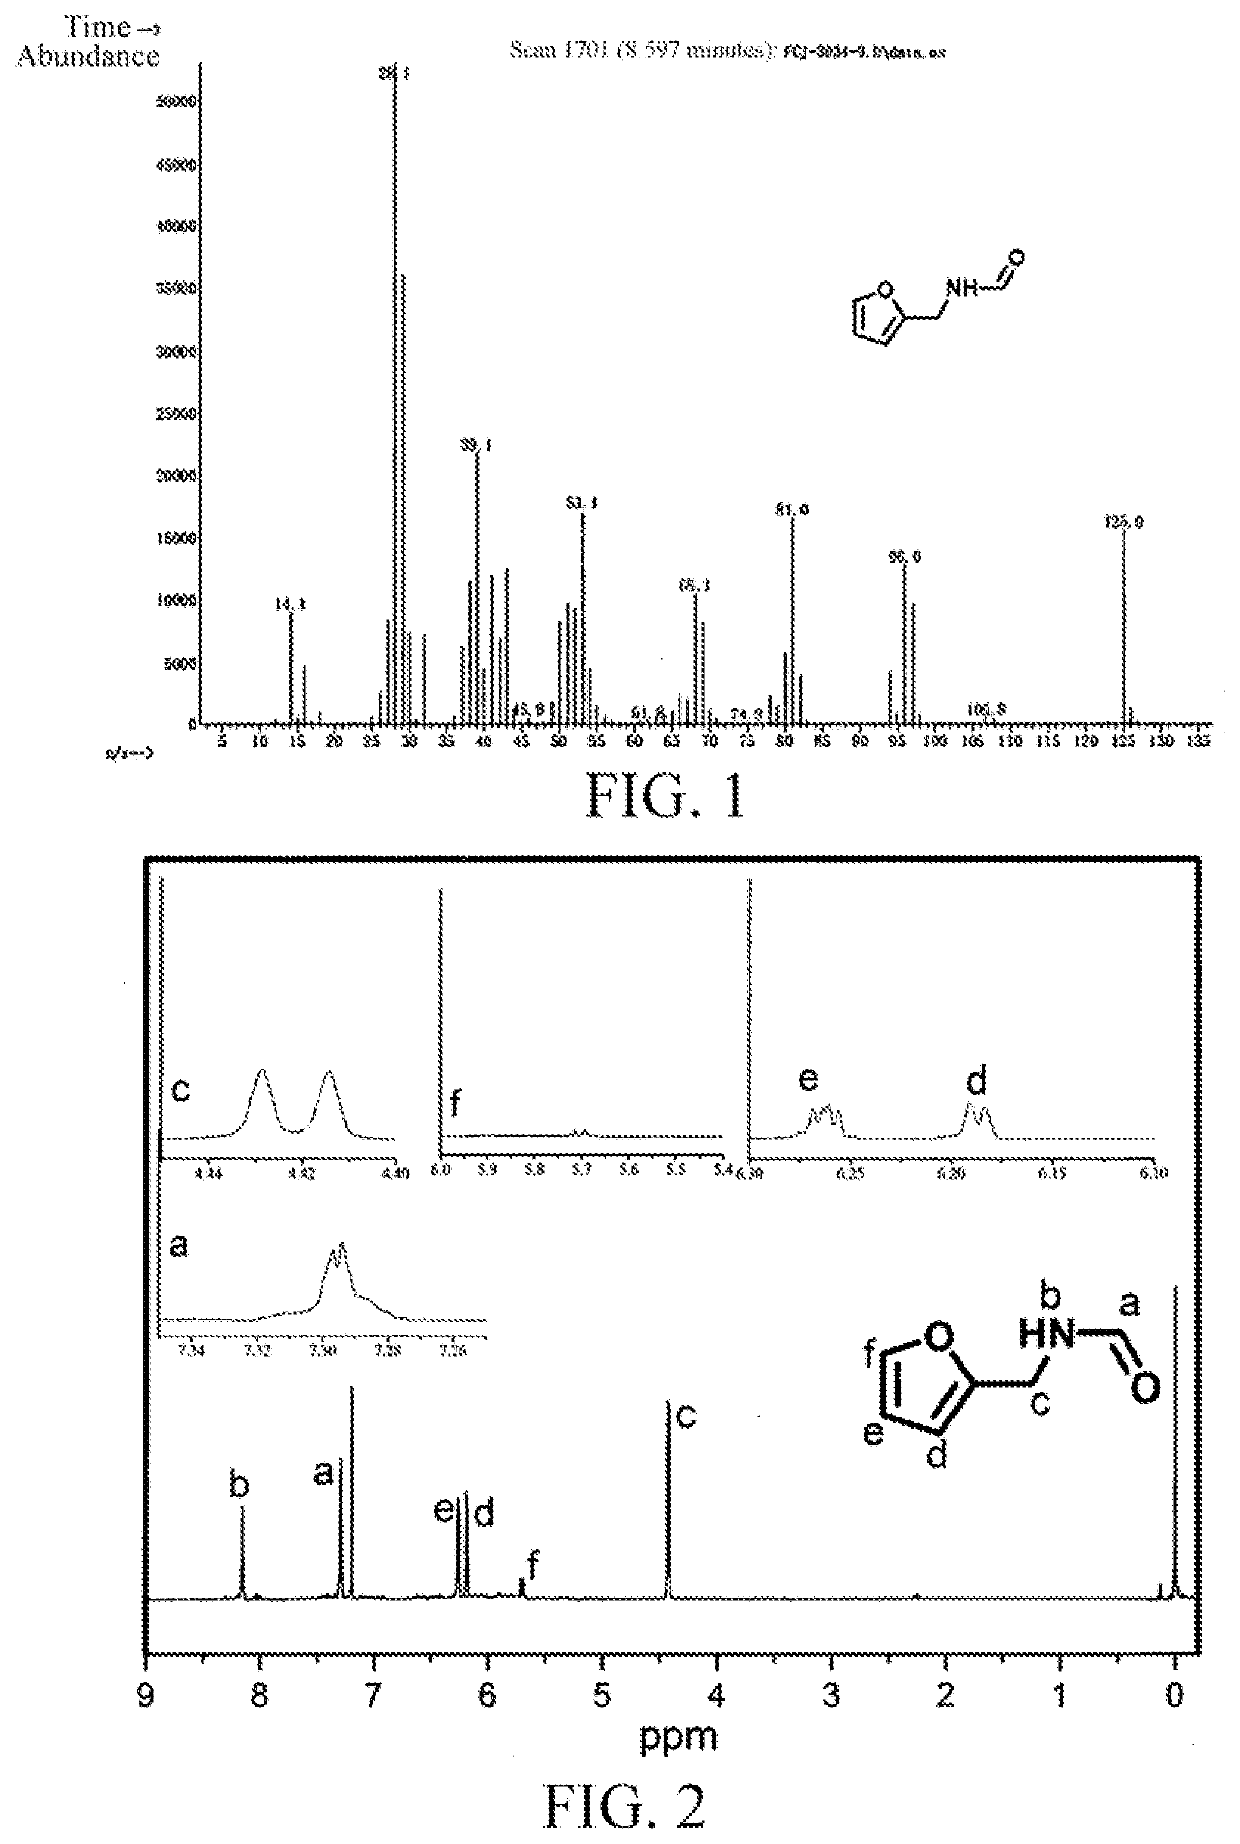 Rapid synthesis method for biomass-based amine